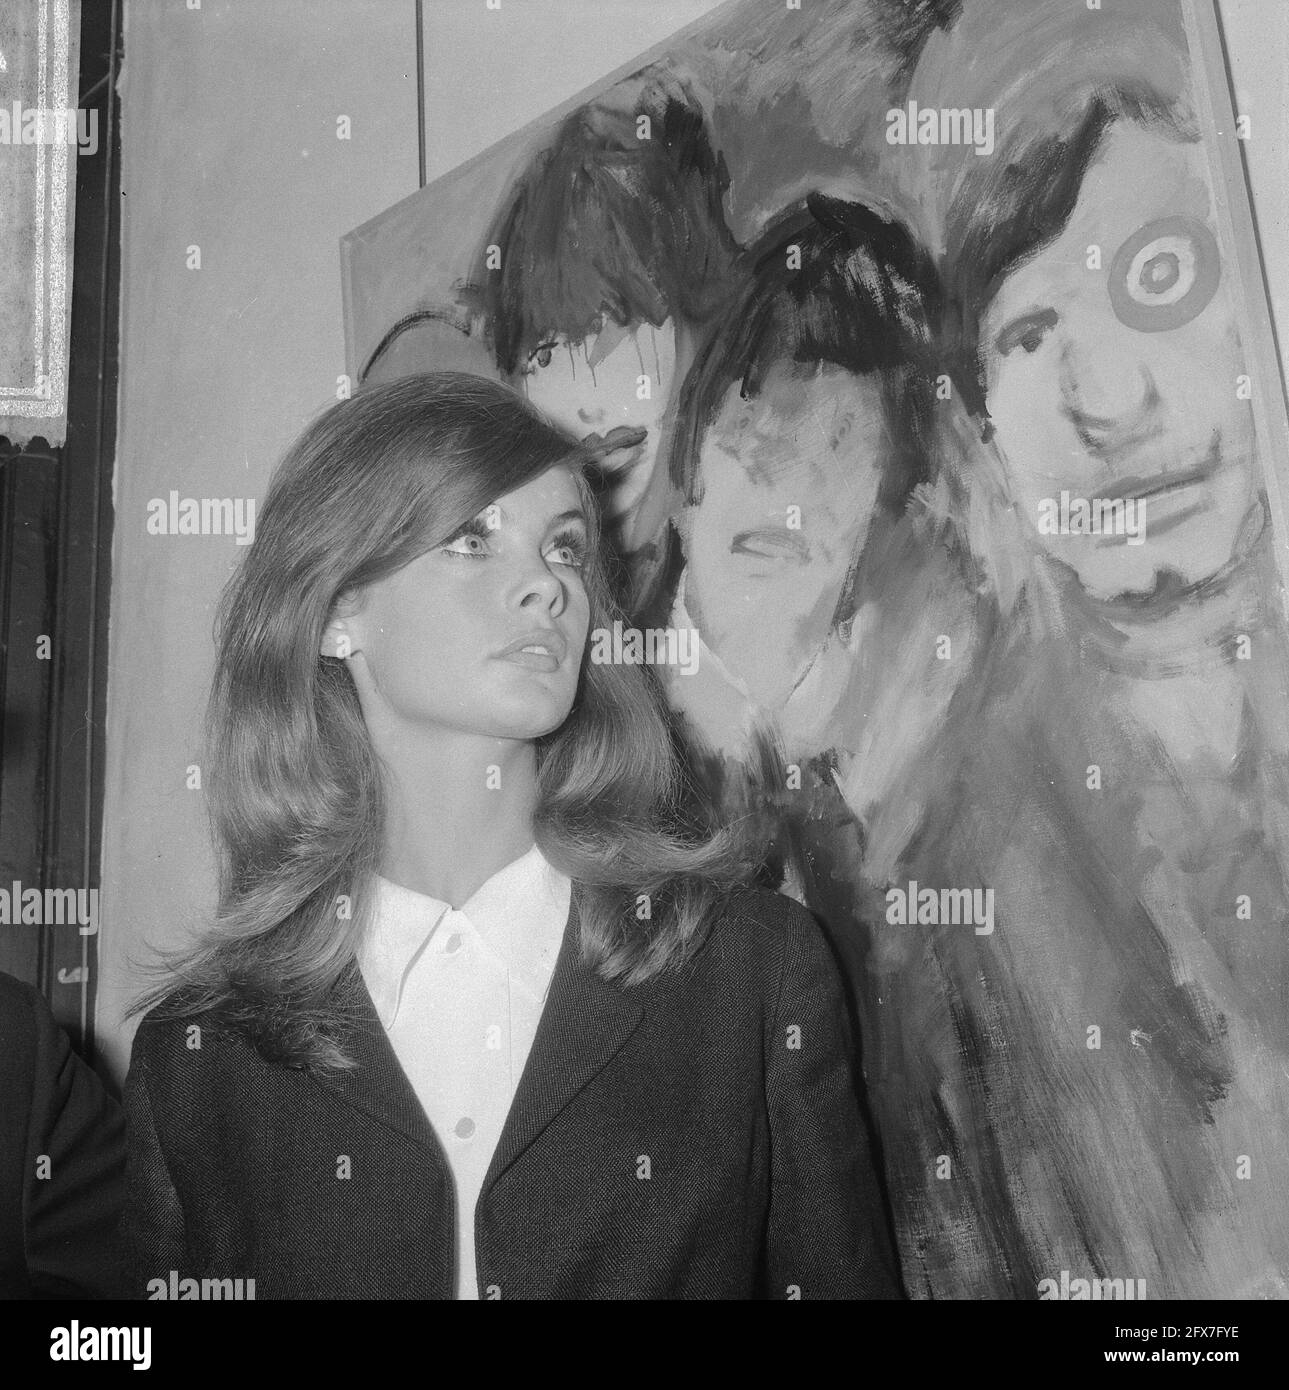 Jean Shrimpton (photo model) exhibition opened in Galerie Krikhaar, Amsterdam, September 17, 1965, exhibitions, The Netherlands, 20th century press agency photo, news to remember, documentary, historic photography 1945-1990, visual stories, human history of the Twentieth Century, capturing moments in time Stock Photo